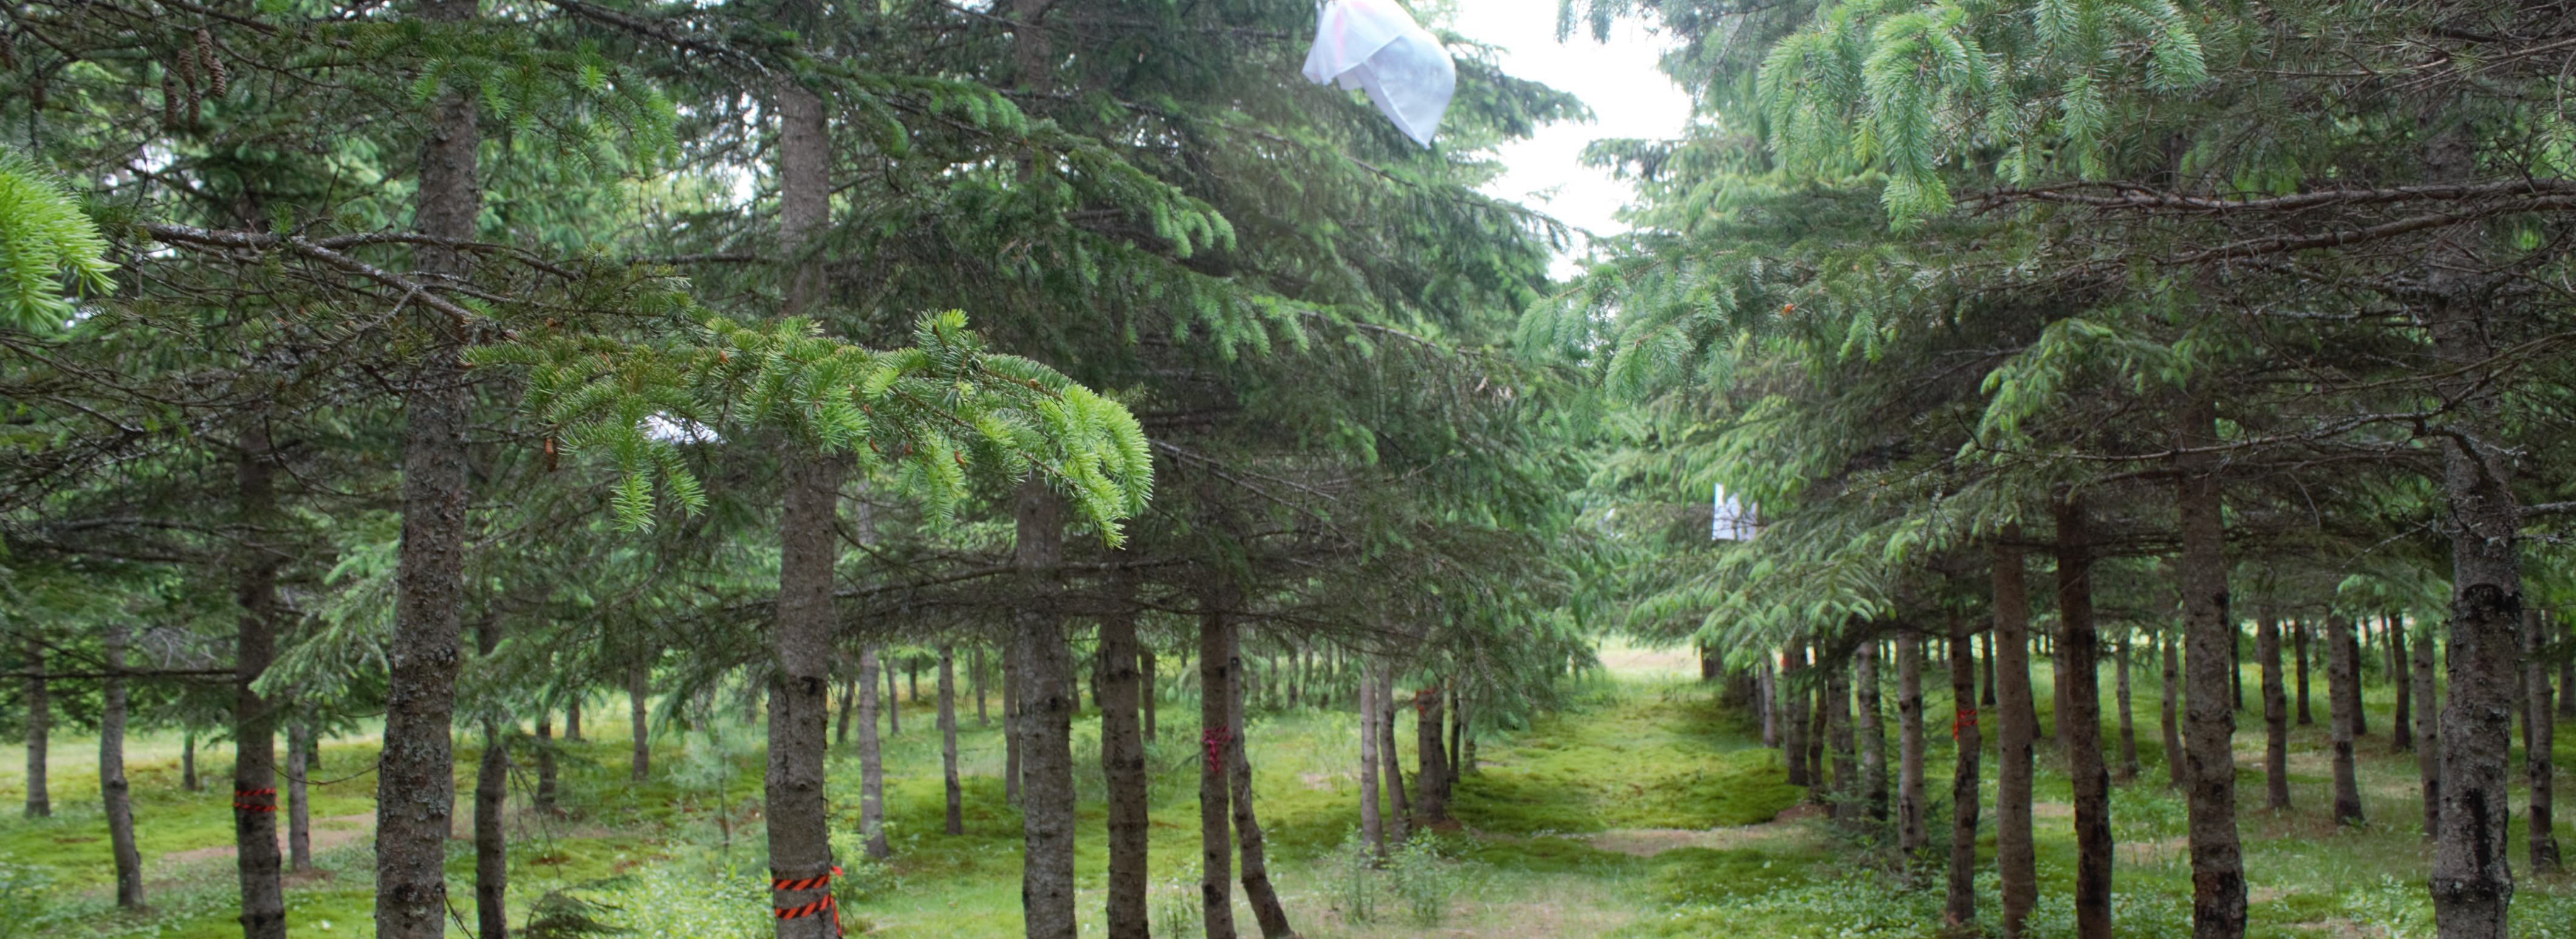 White spruce clones from Natural Resources Canada, Valcartier, Québec, Canada